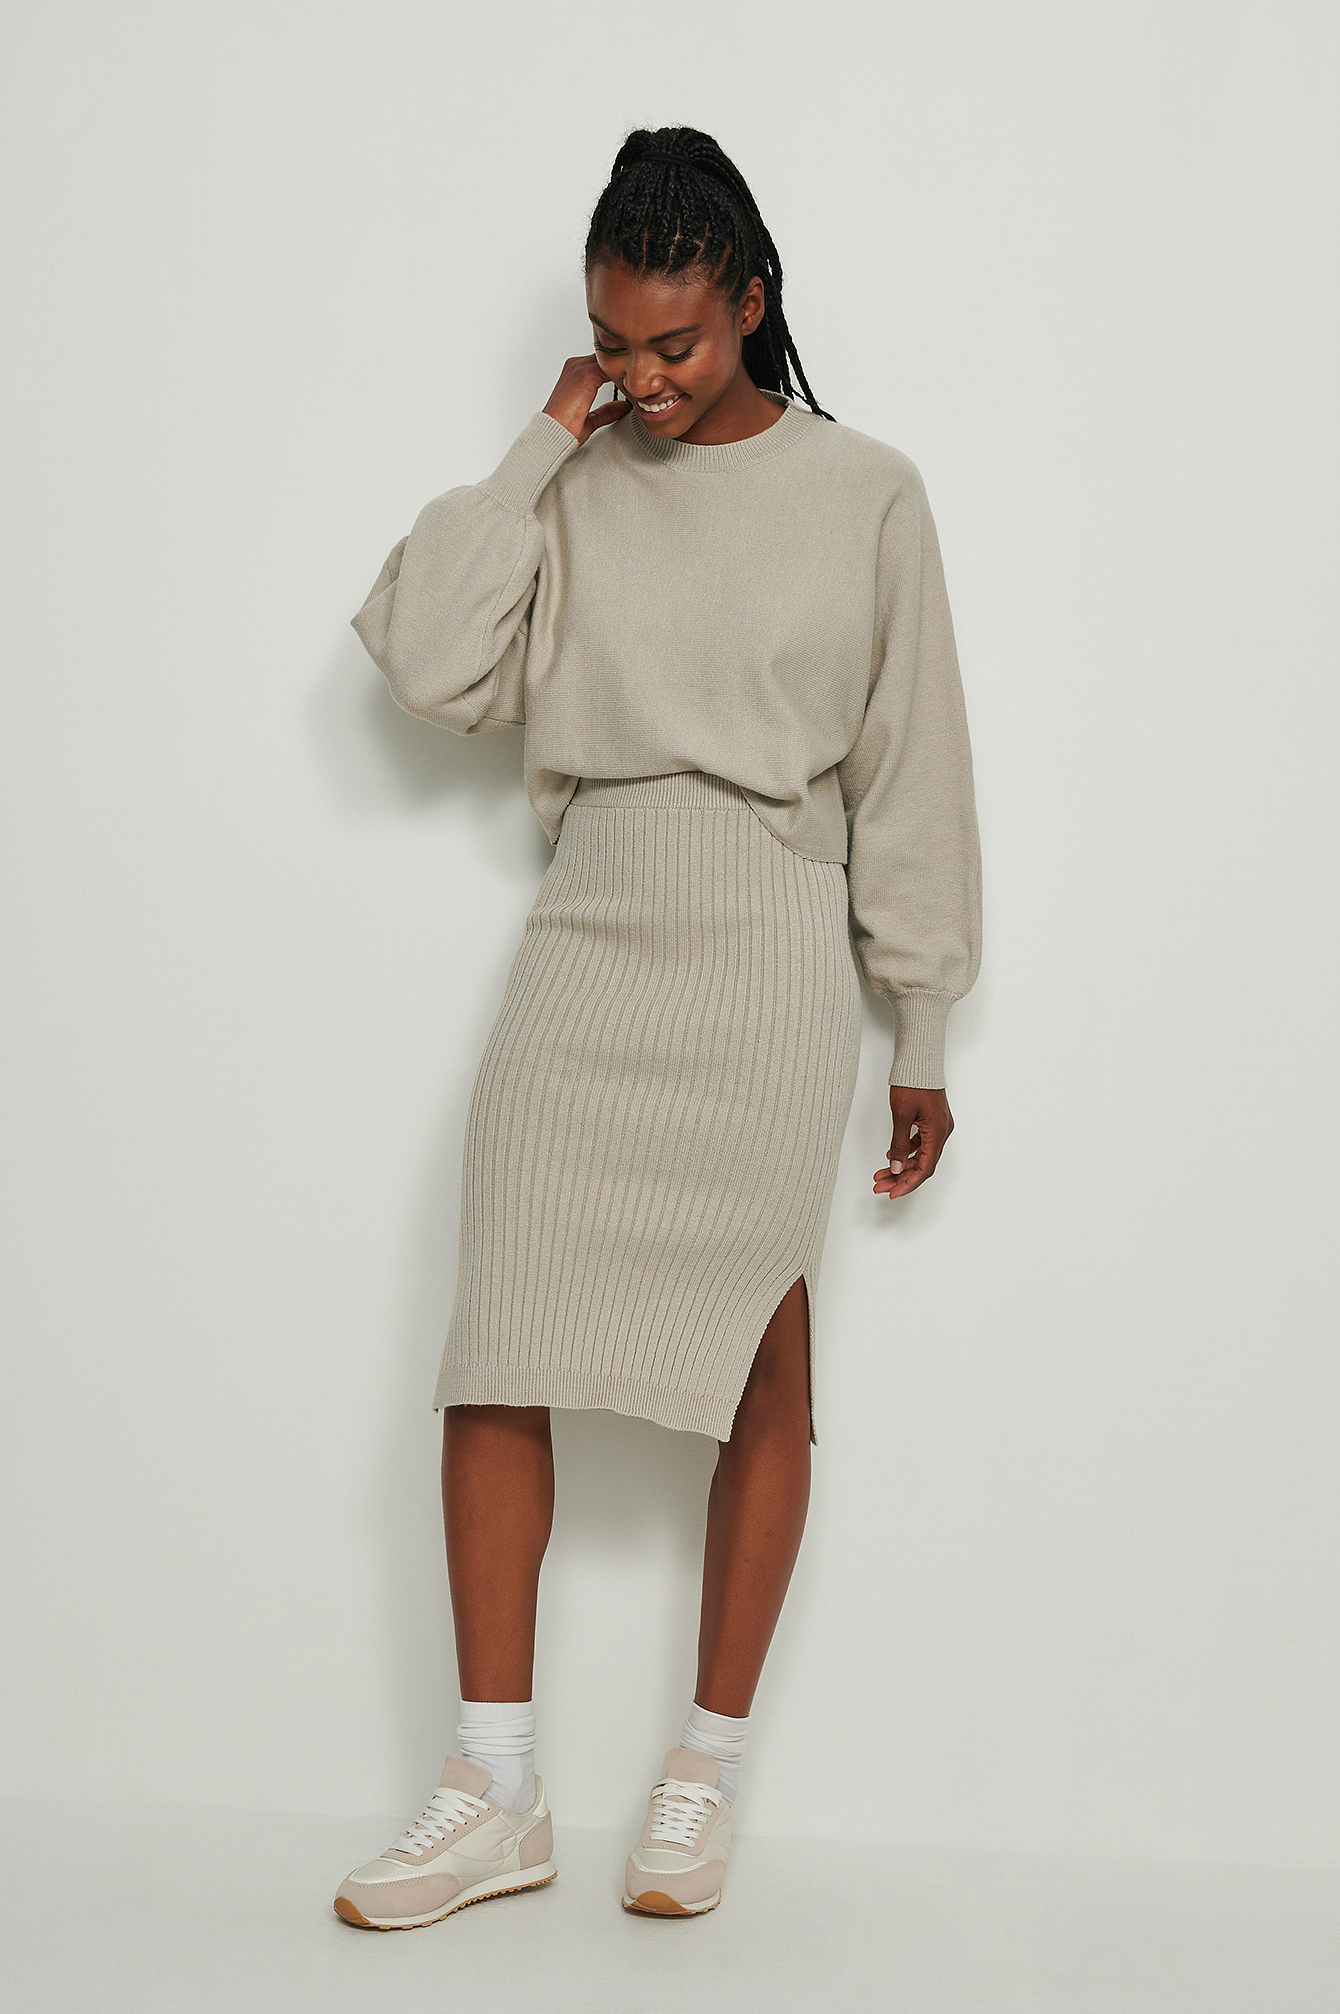 Rib Knitted Skirt Outfit